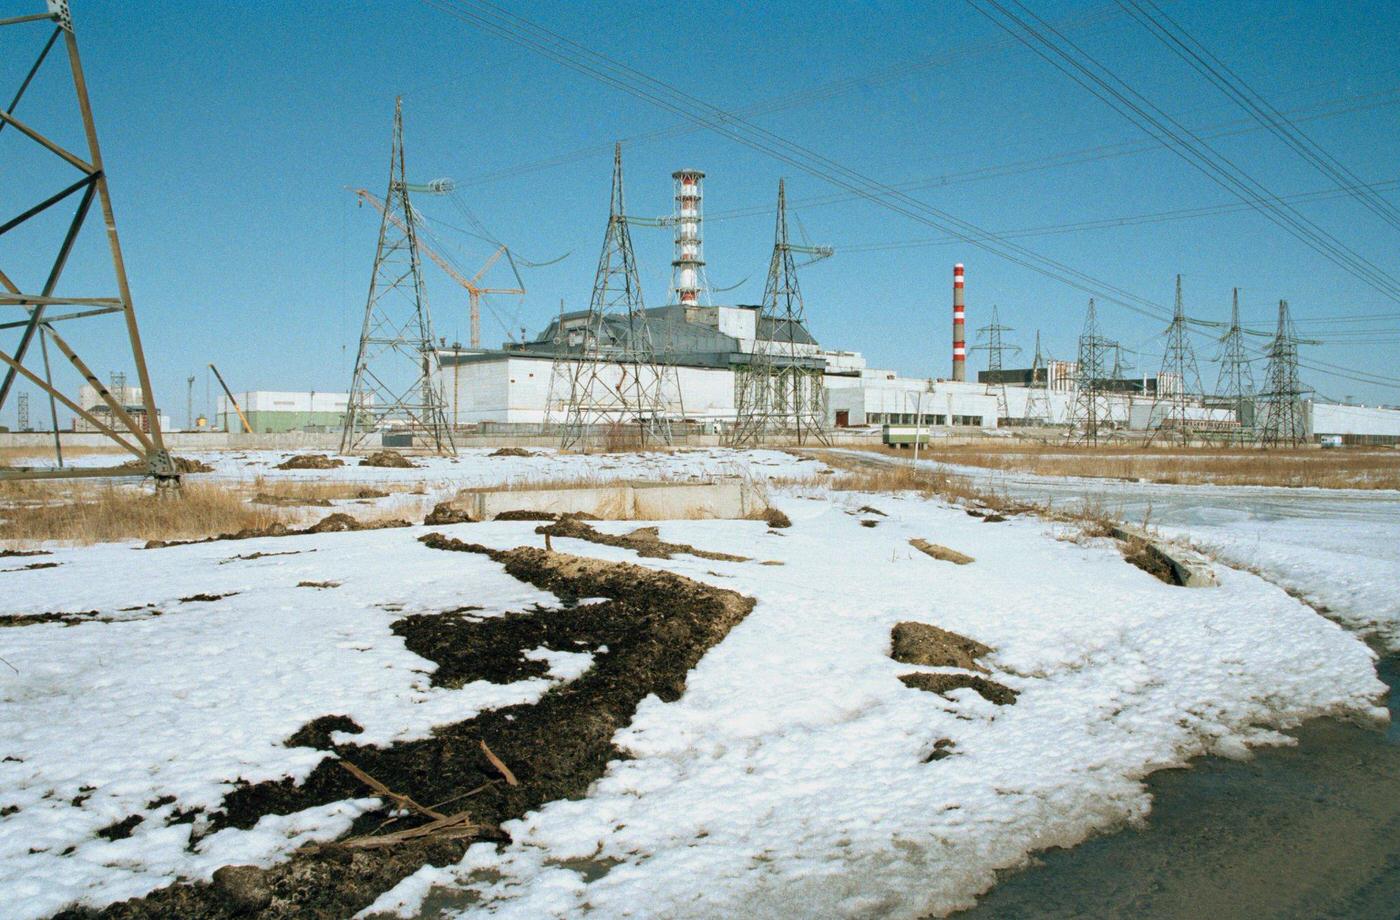 Chernobyl Nuclear Power Plant, a Decade After the Disaster, 1996